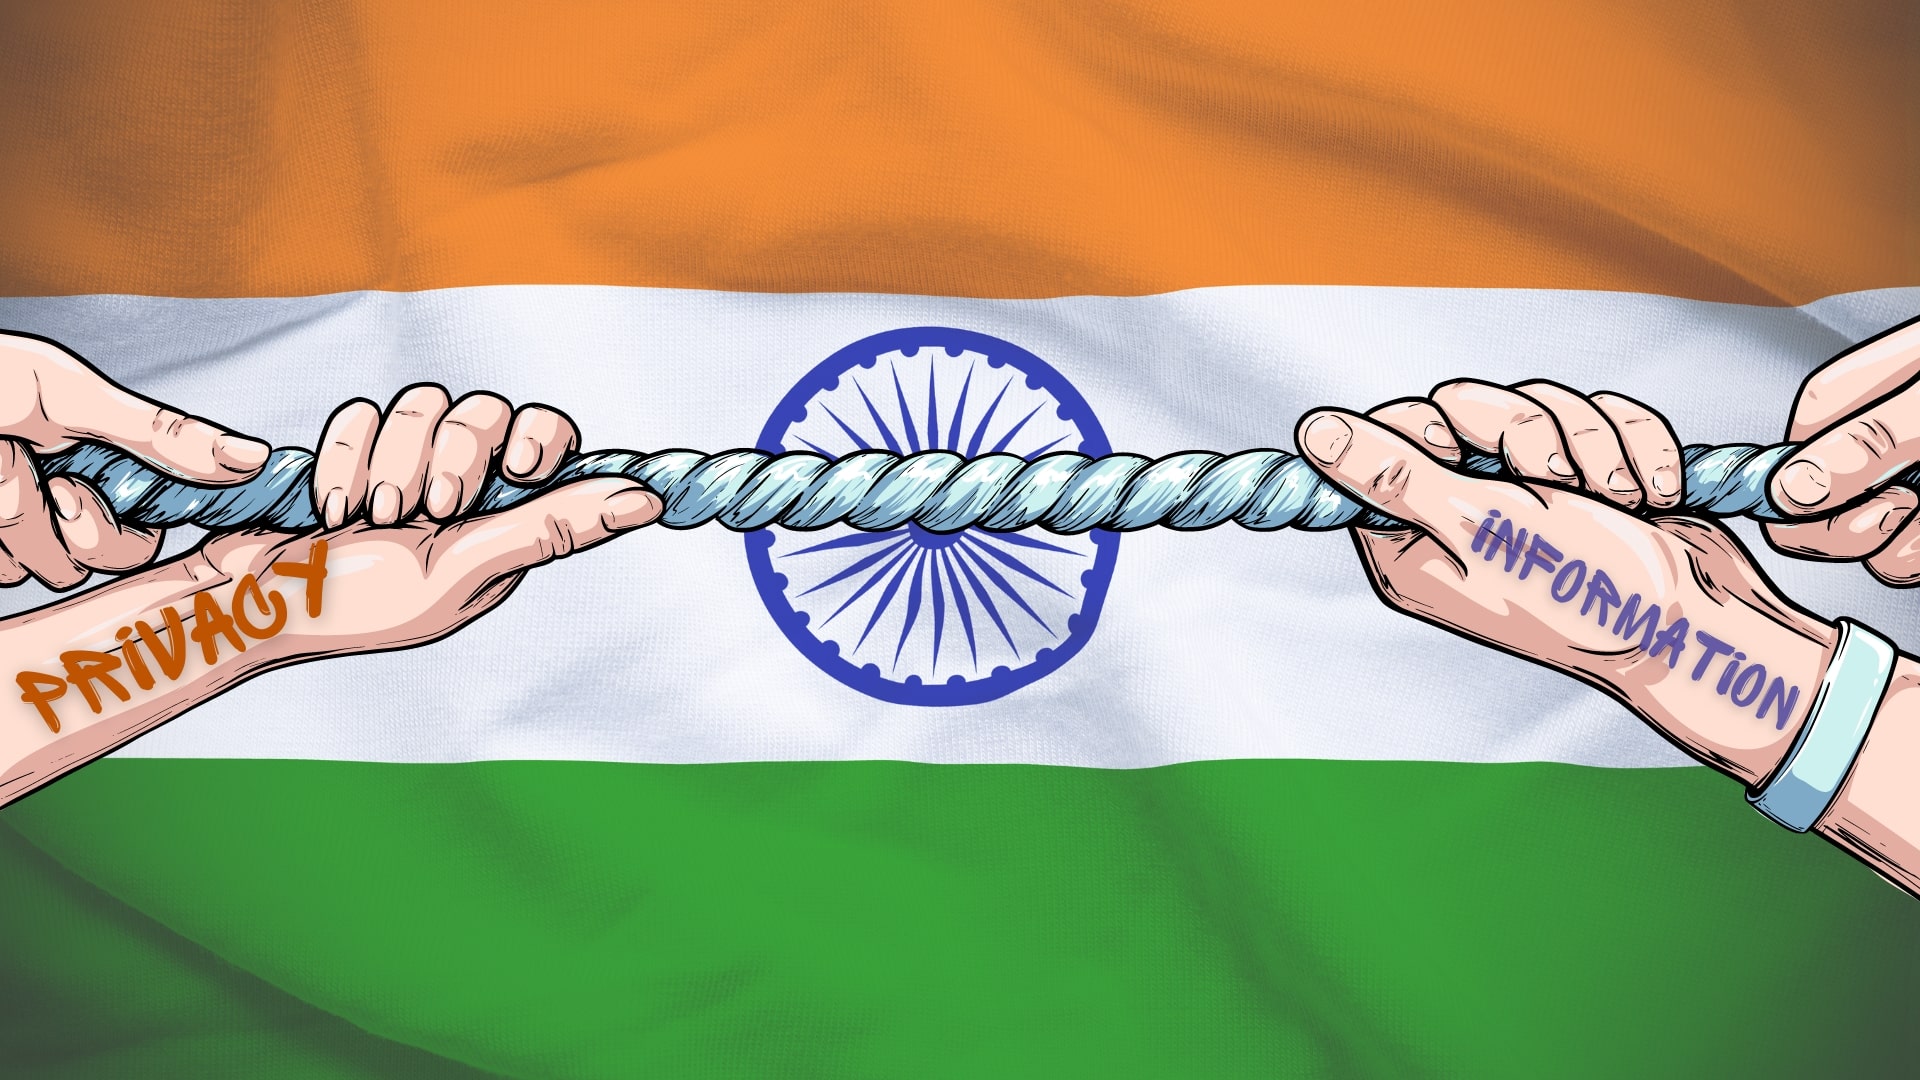 A hand labeled PRIVACY tugs at a rope against a hand labeled INFORMATION against the backdrop of an Indian flag.